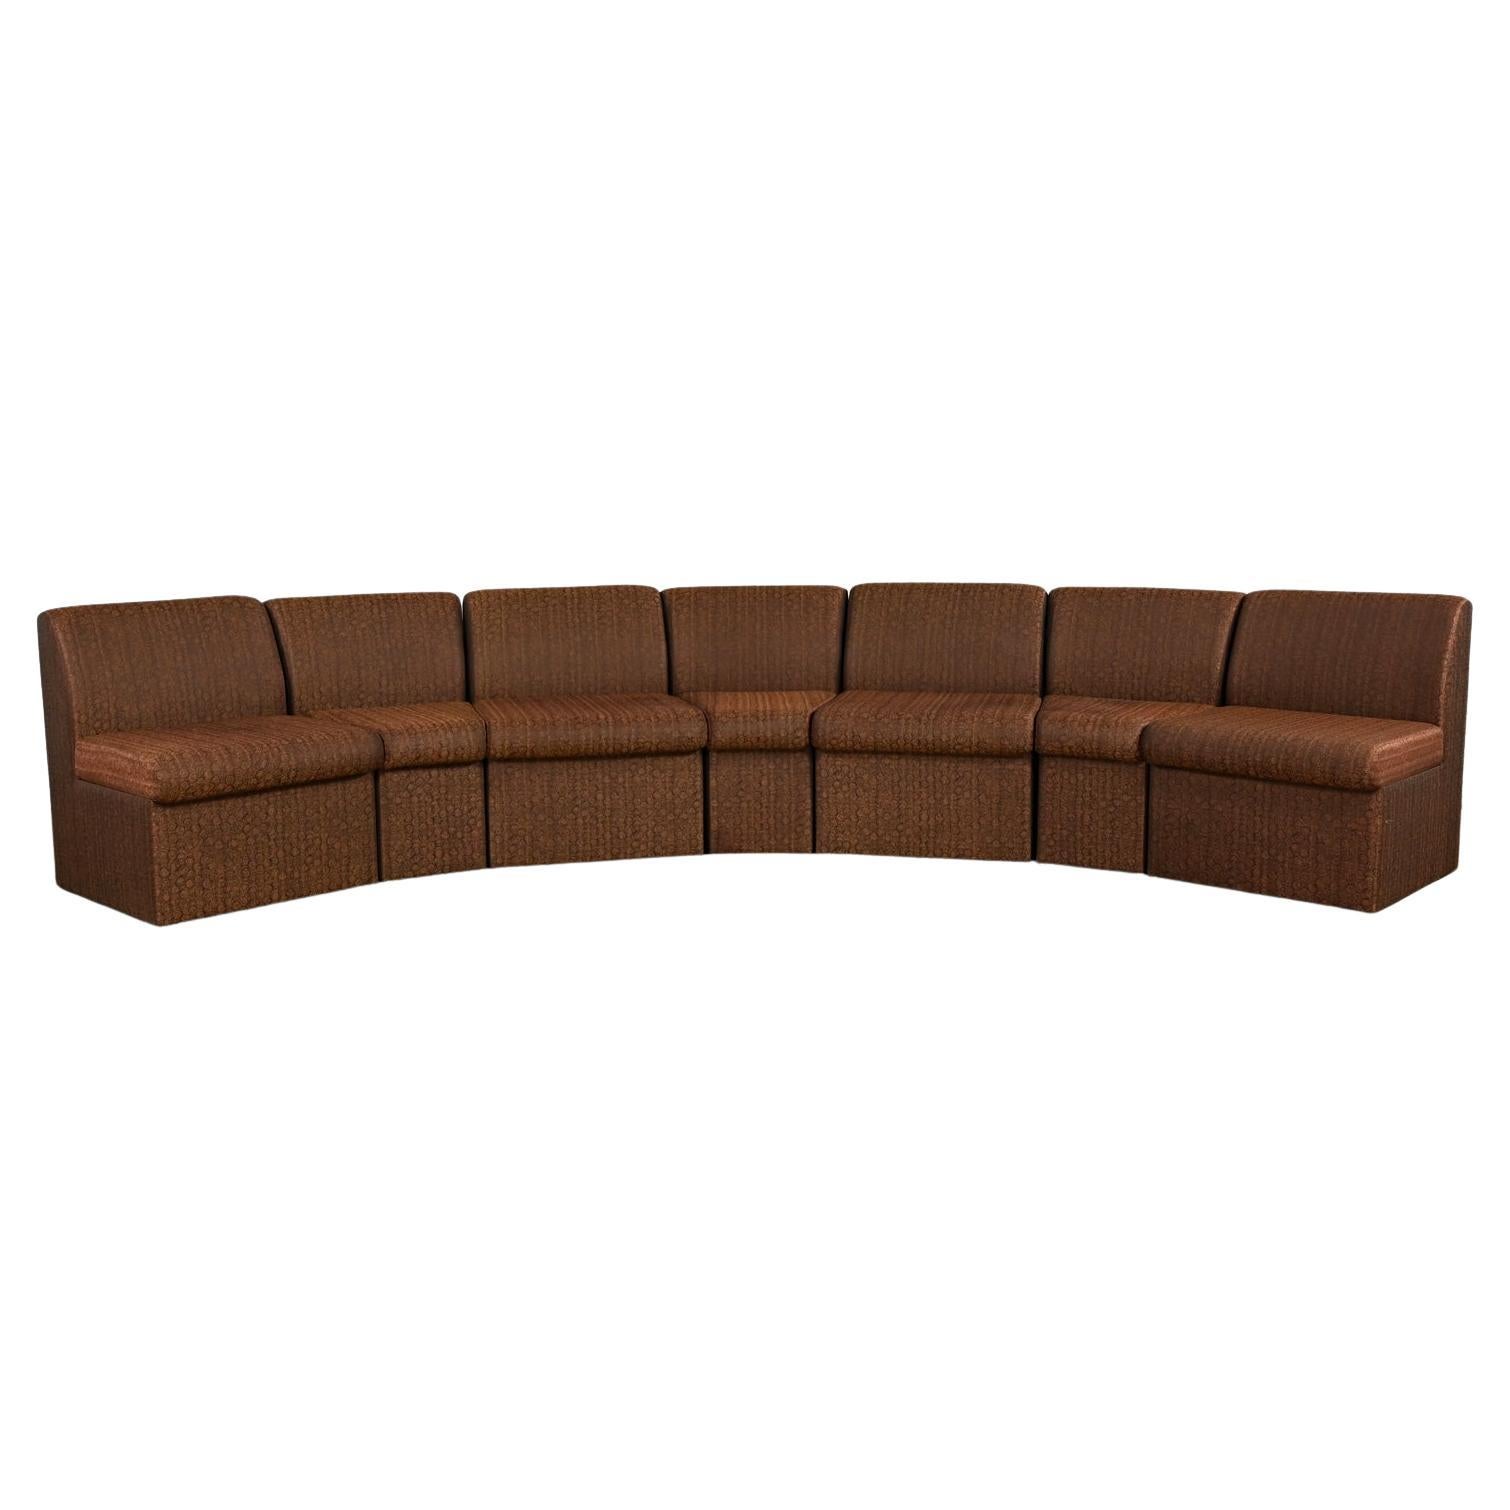 What is the best sectional couch?